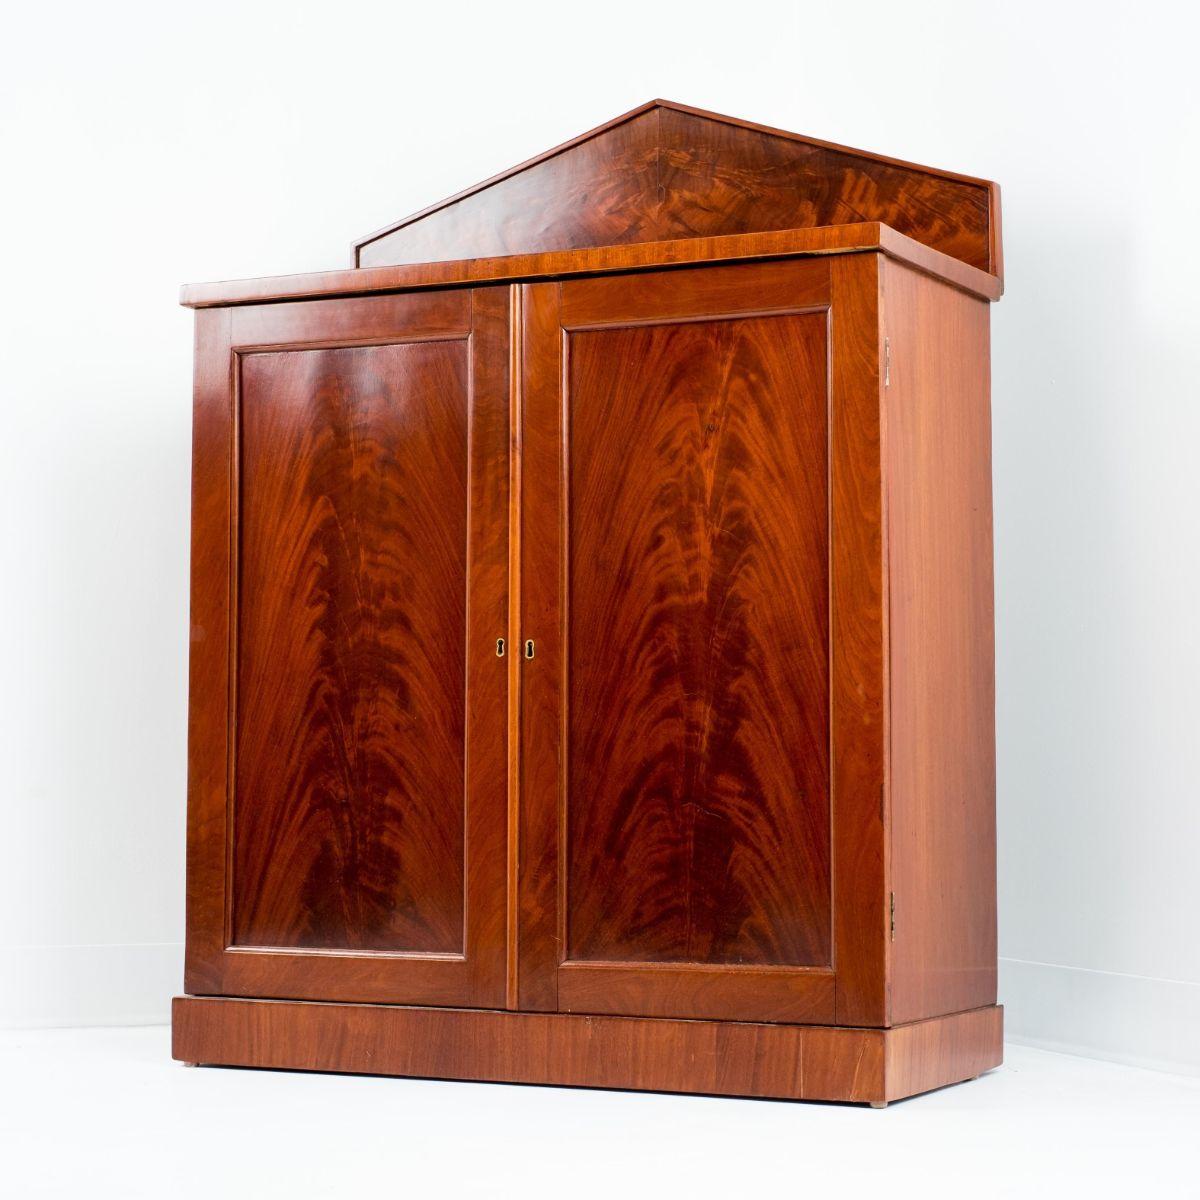 William IV two door server on base molding and mounted with a pedimented back splash in mahogany and book matched mahogany veneers.
England, circa 1820.